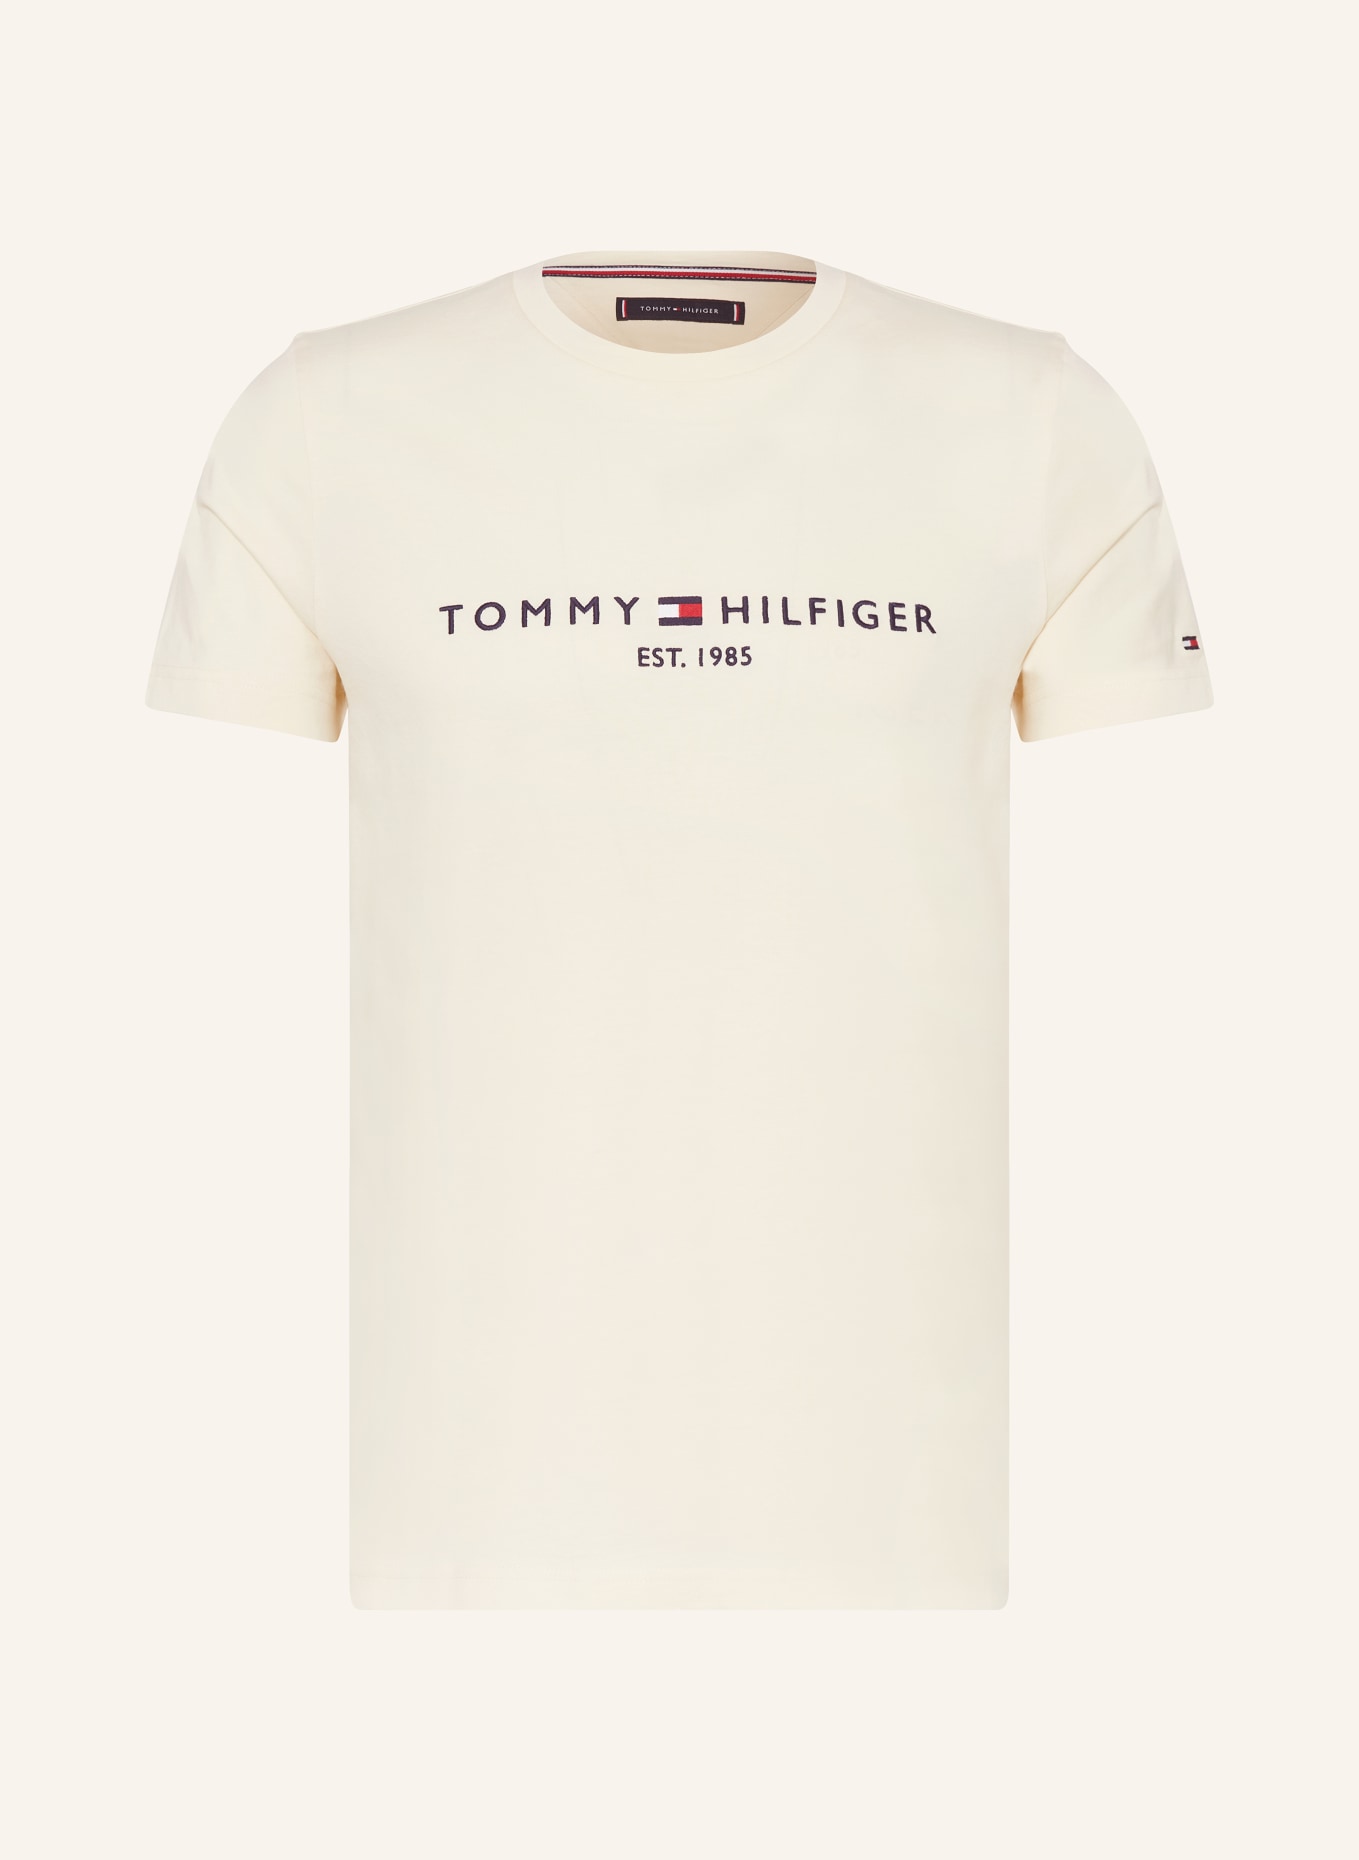 TOMMY HILFIGER T-shirt, Color: LIGHT YELLOW (Image 1)